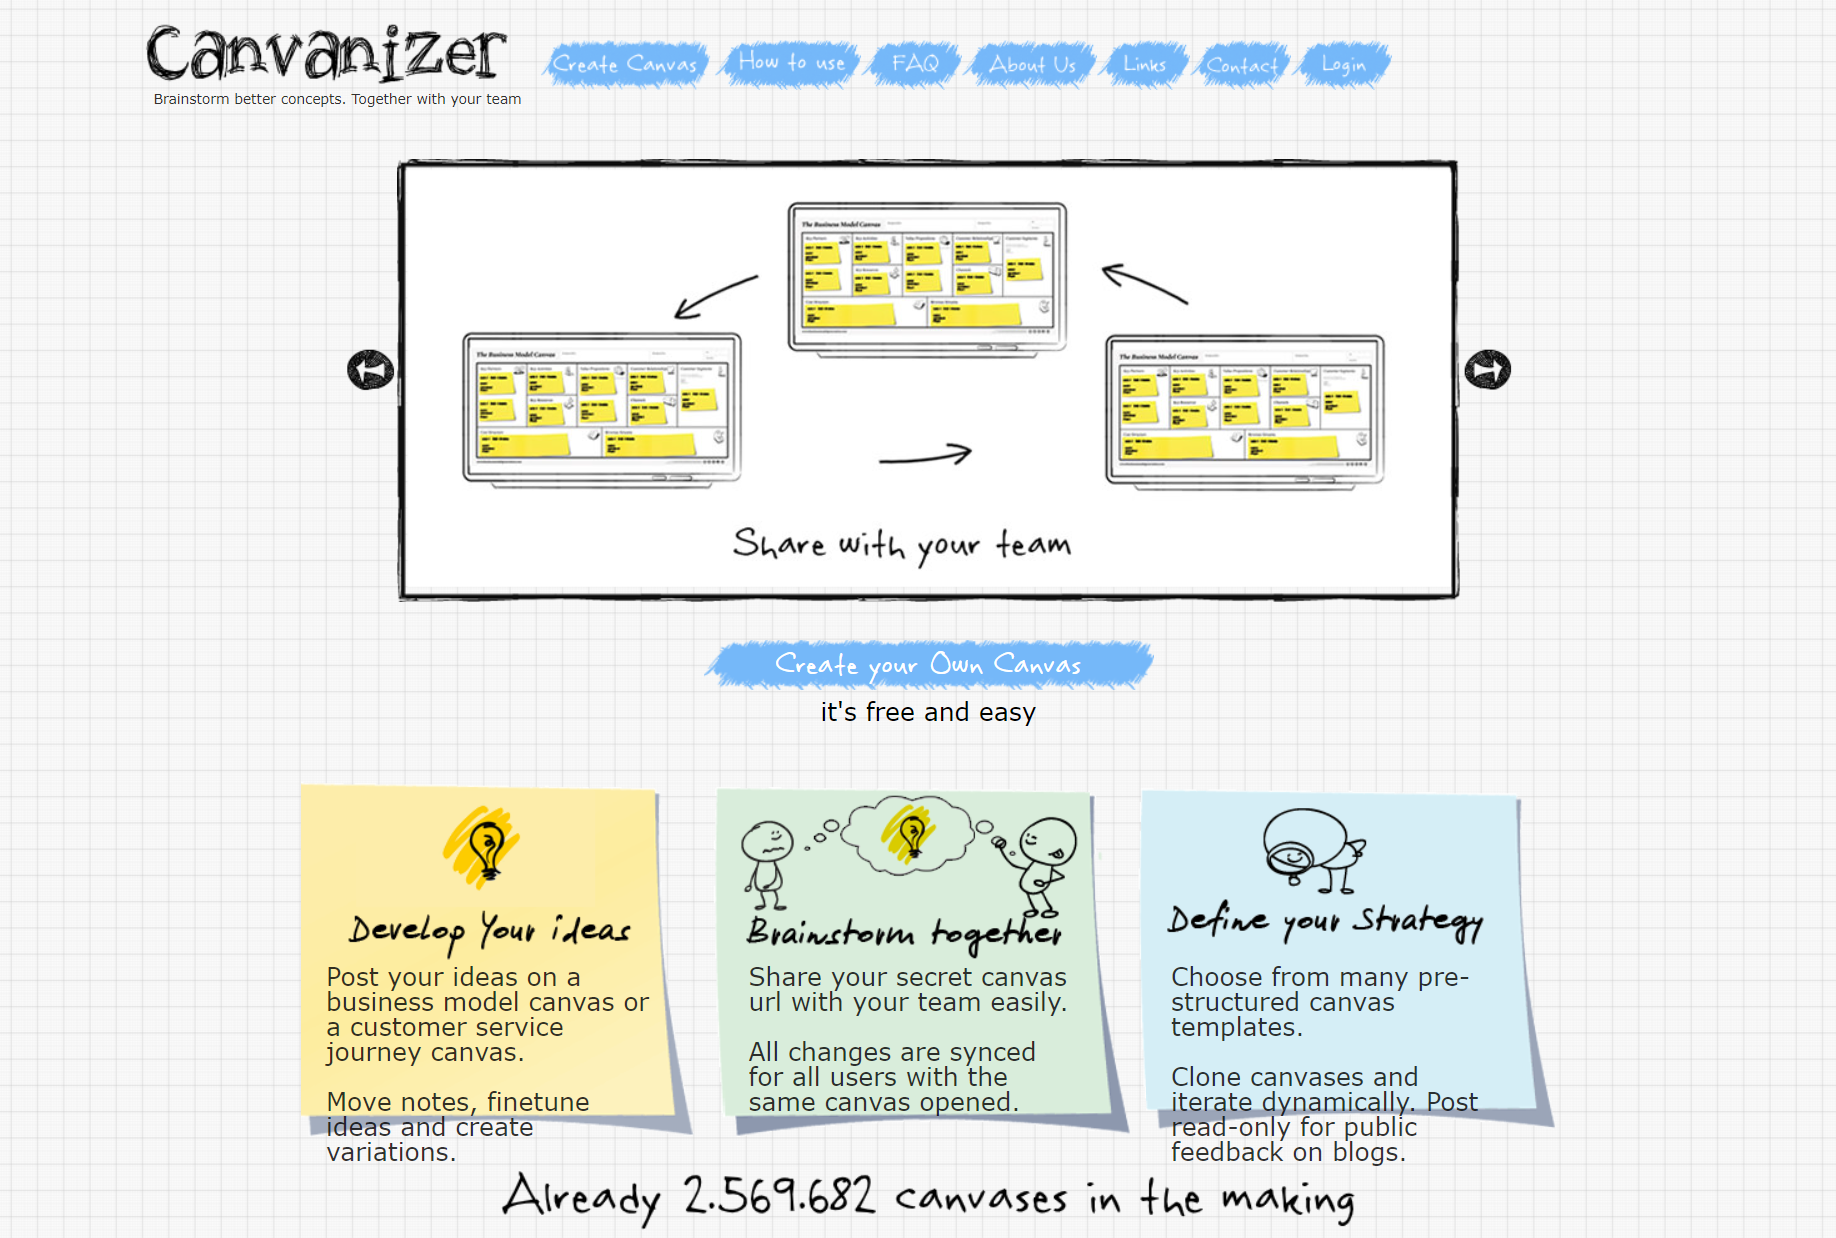 customer journey mapping tools Canvanizer